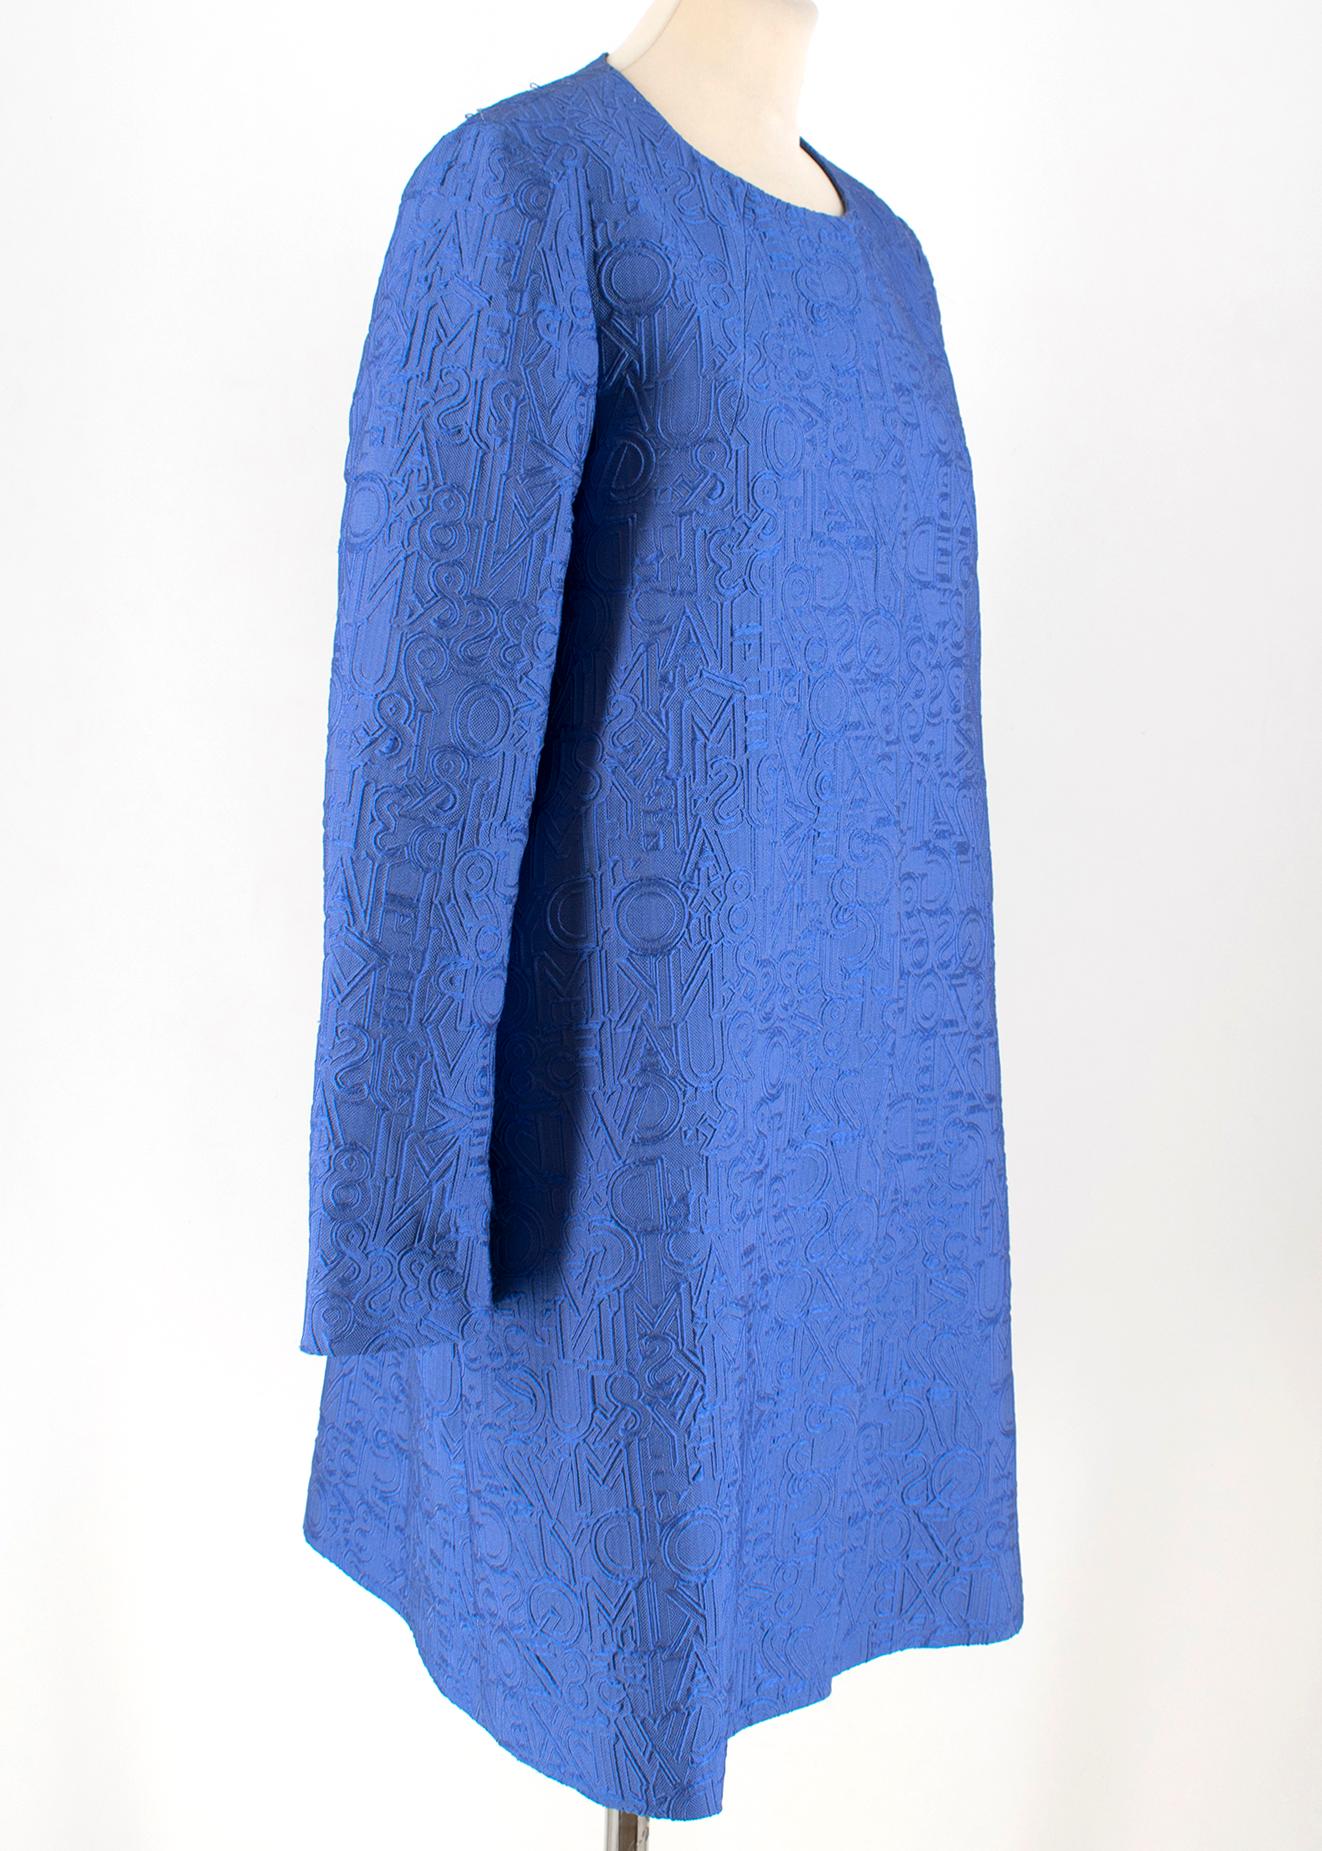 Mary Katrantzou Blue Brocade Twill Coat 

- Blue light coat 
- Textured fabric with letter design
- Grey silk lining
- Round neck
- Hidden push button fastening
Please note, these items are pre-owned and may show some signs of storage, even when